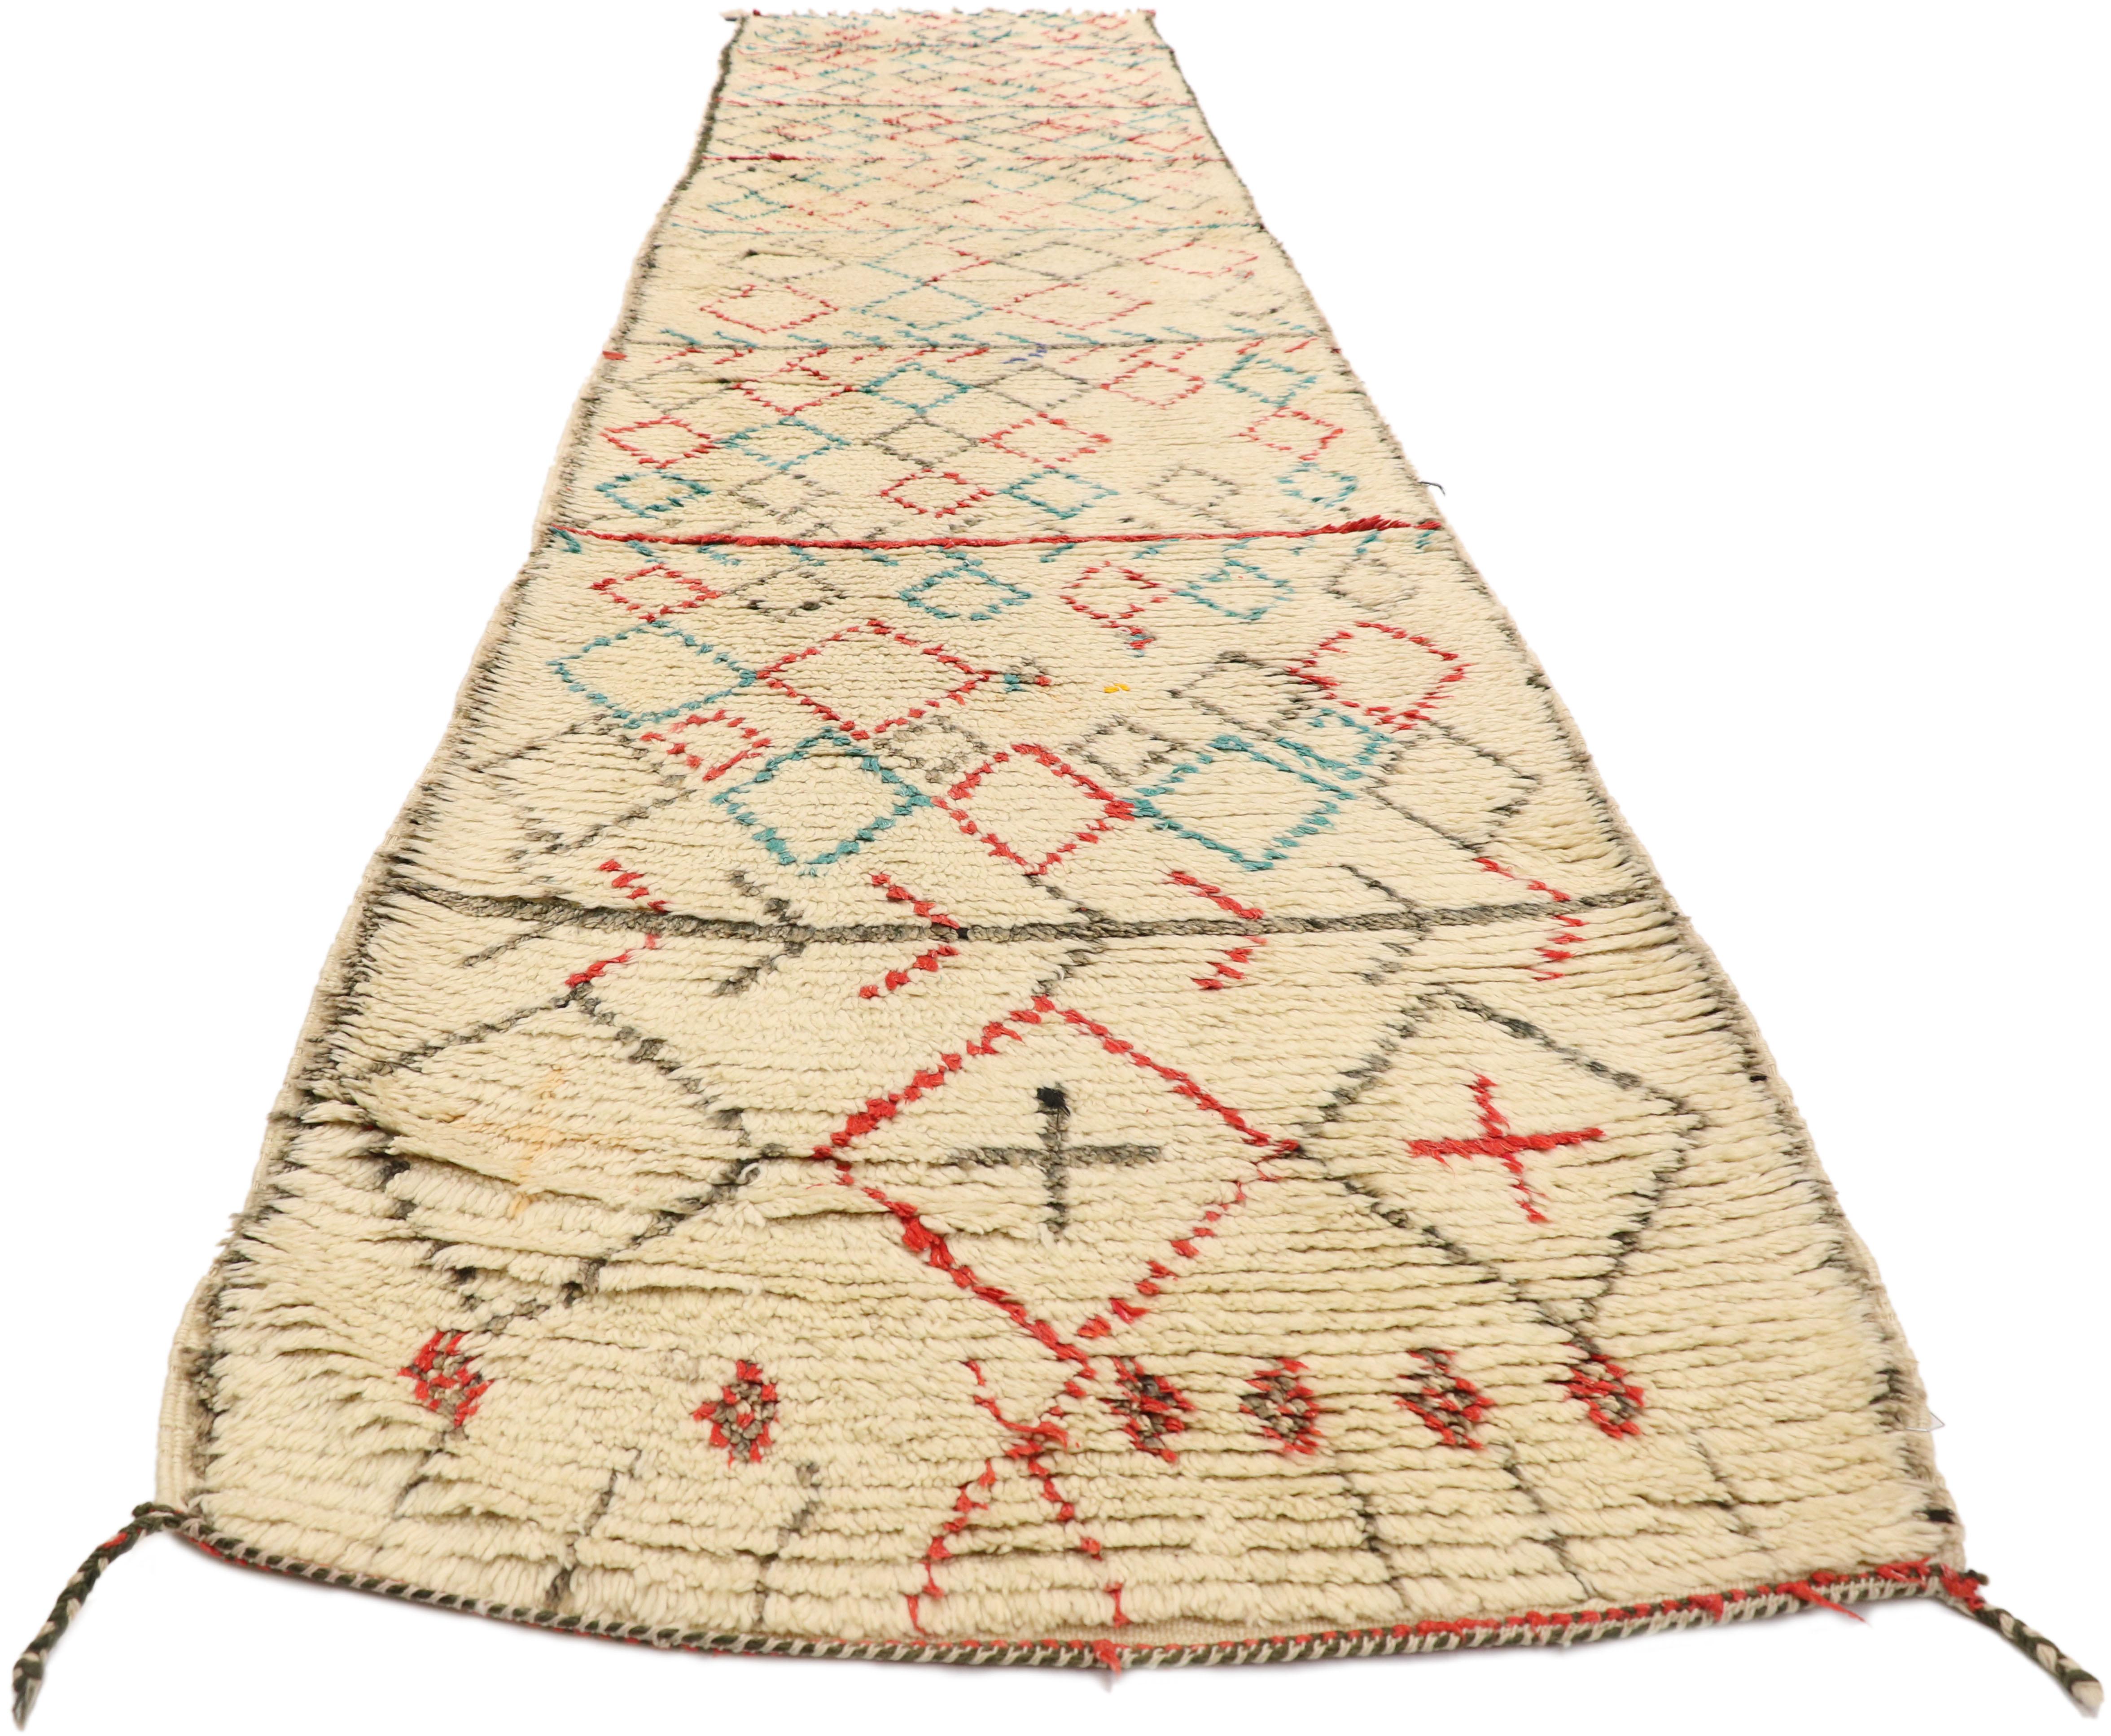 Bohemian Vintage Berber Moroccan Azilal Runner with Boho Chic Tribal Style For Sale